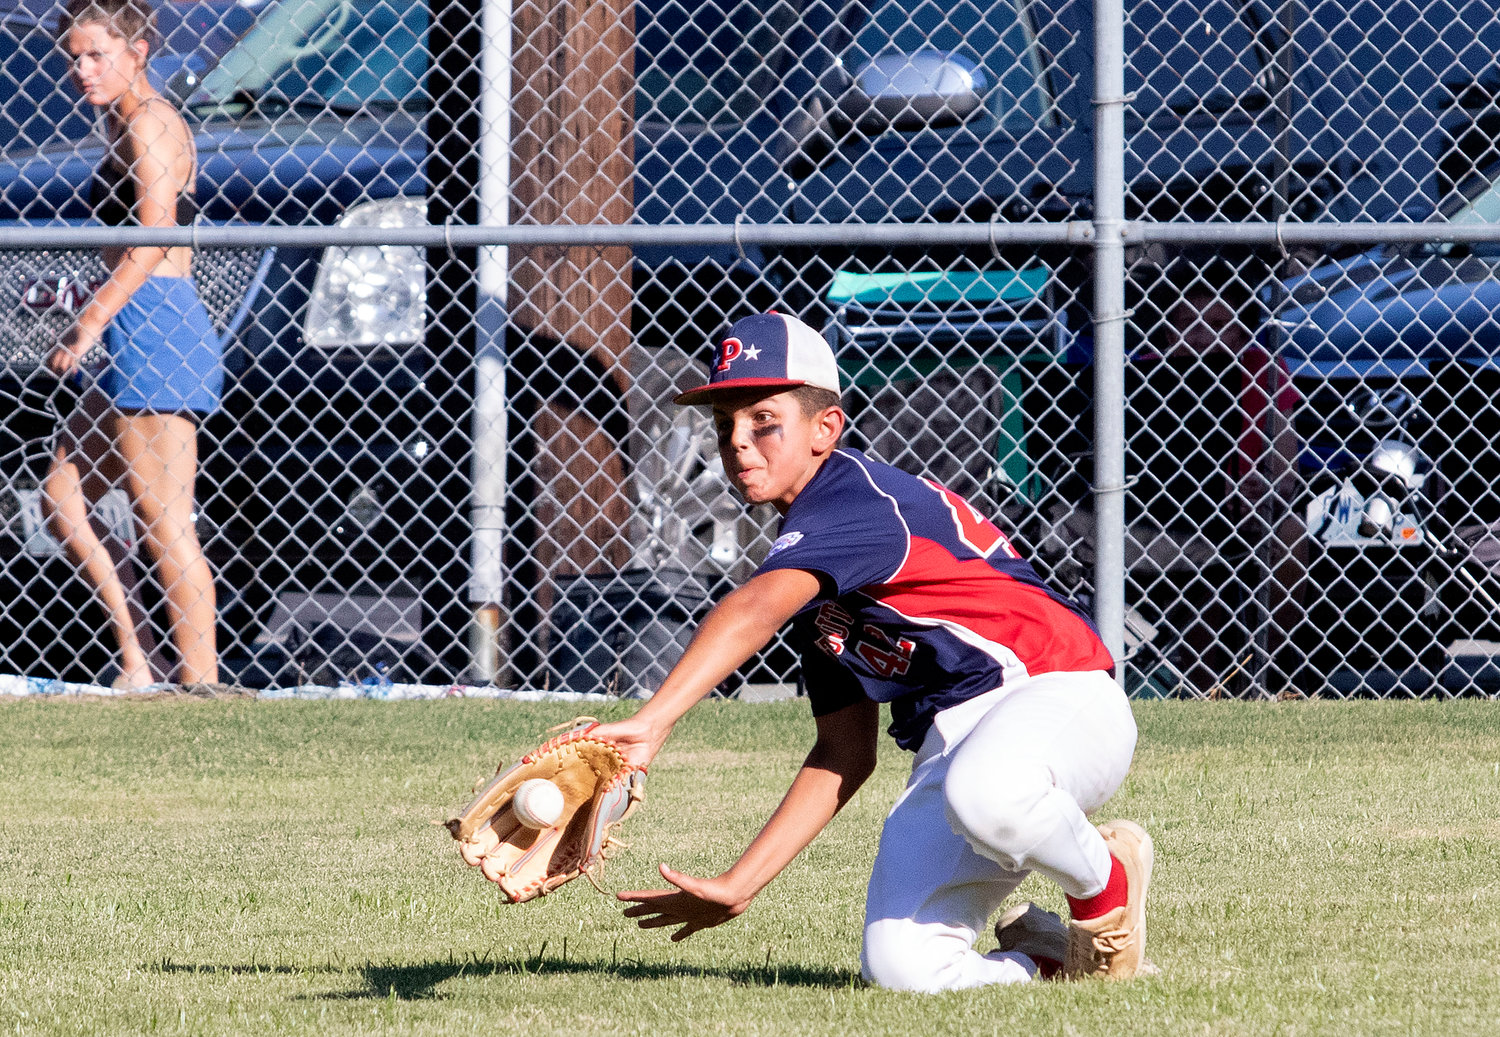 Riven Patel slides in to make an across-the-body catch to make the first out of the sixth inning against Cumberland on Saturday during the state Little League tournament.